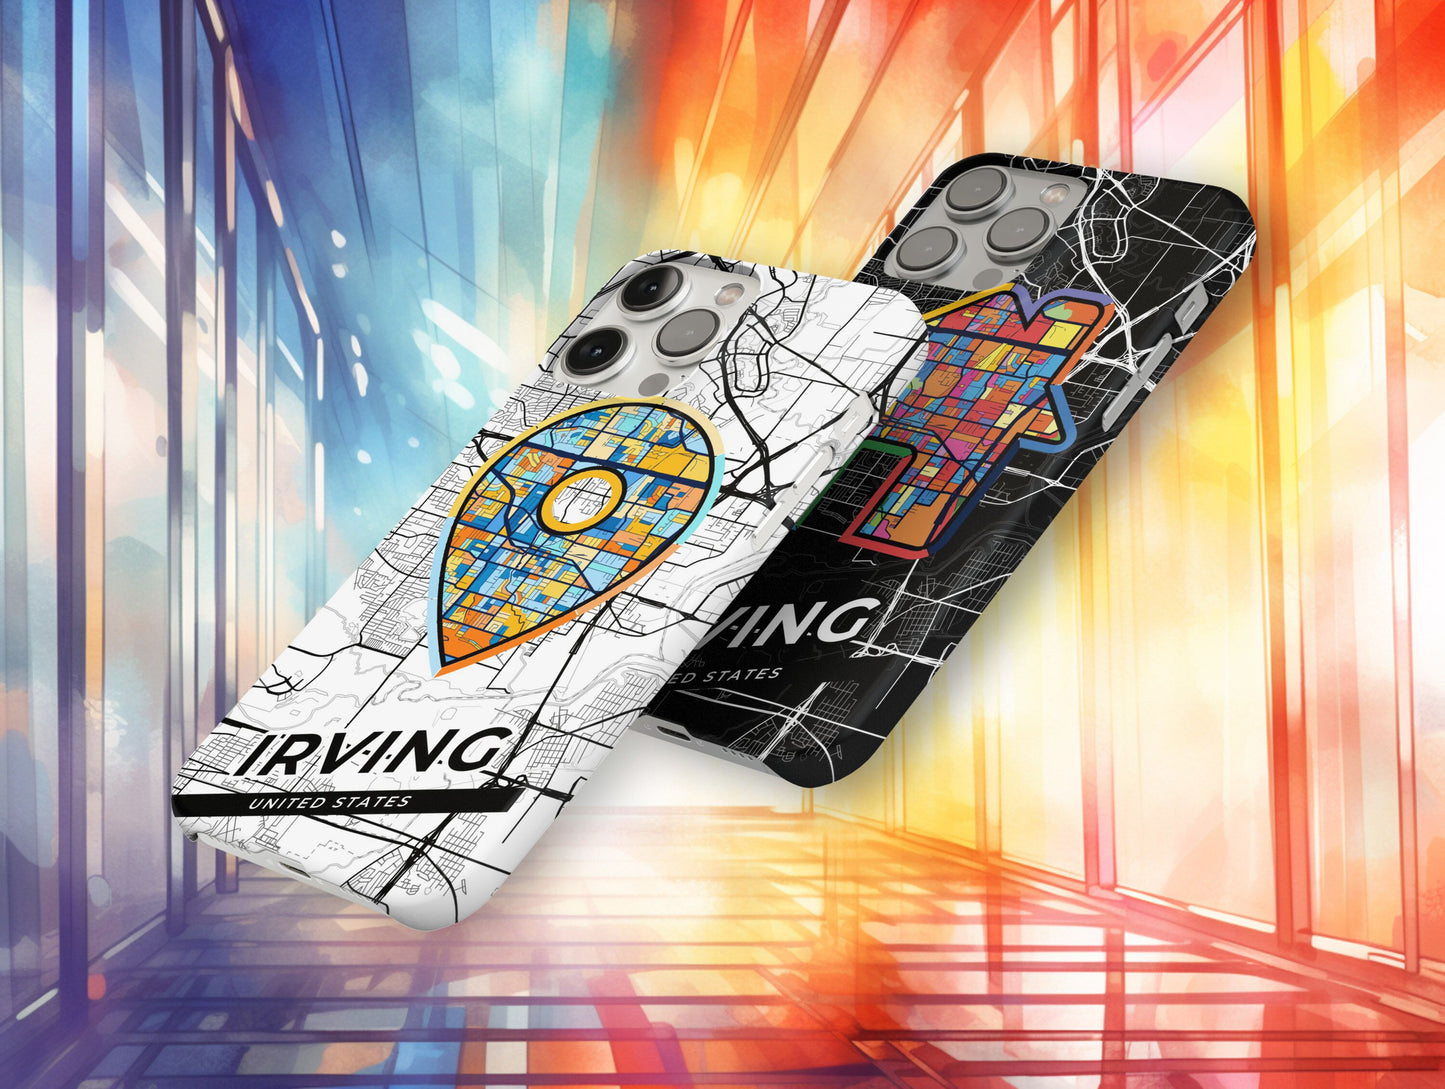 Irving Texas slim phone case with colorful icon. Birthday, wedding or housewarming gift. Couple match cases.